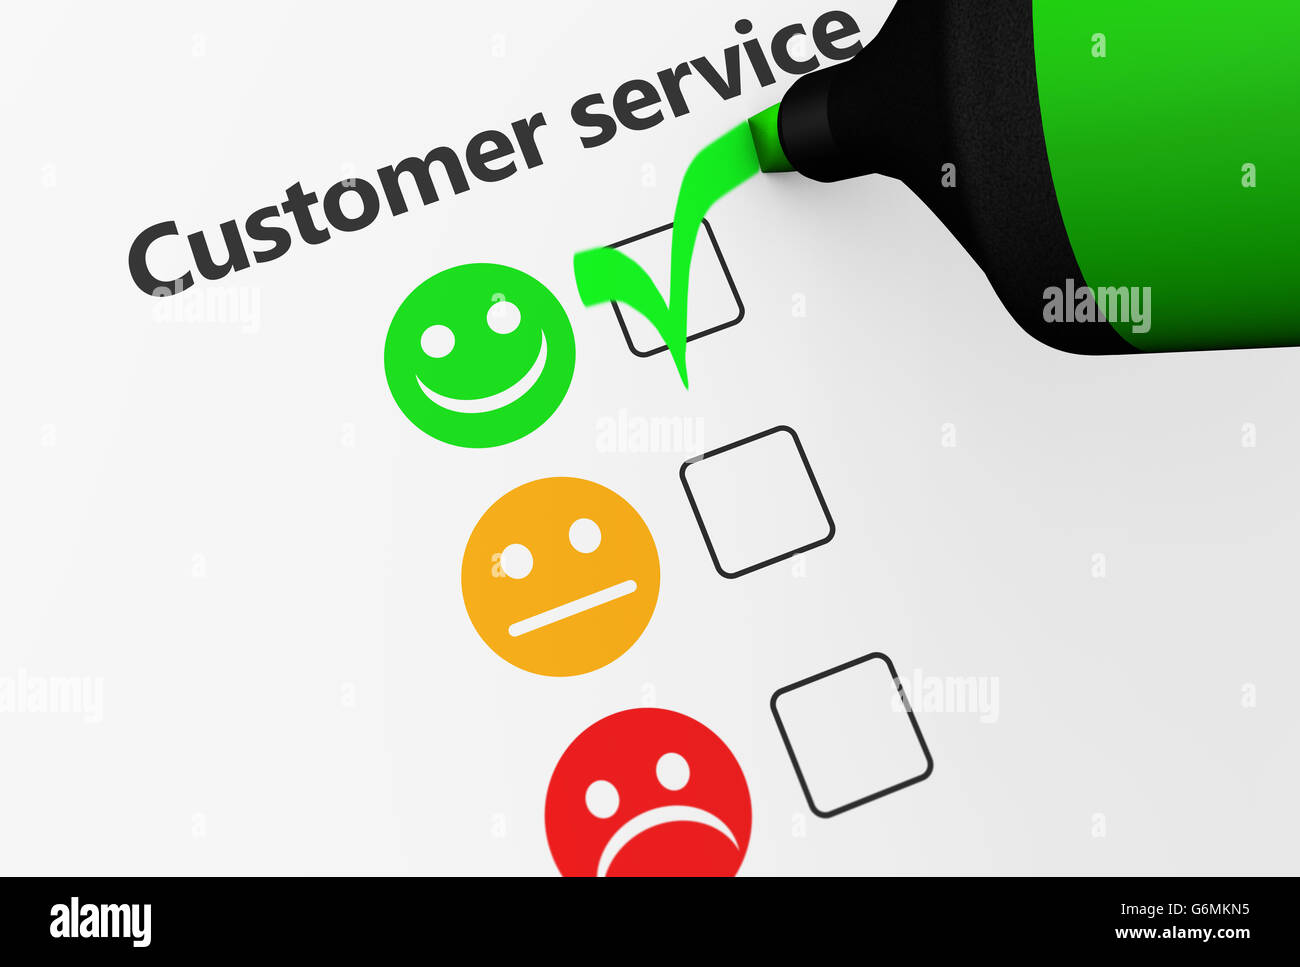 Customer service happy feedback rating checklist and business quality evaluation concept 3D illustration. Stock Photo